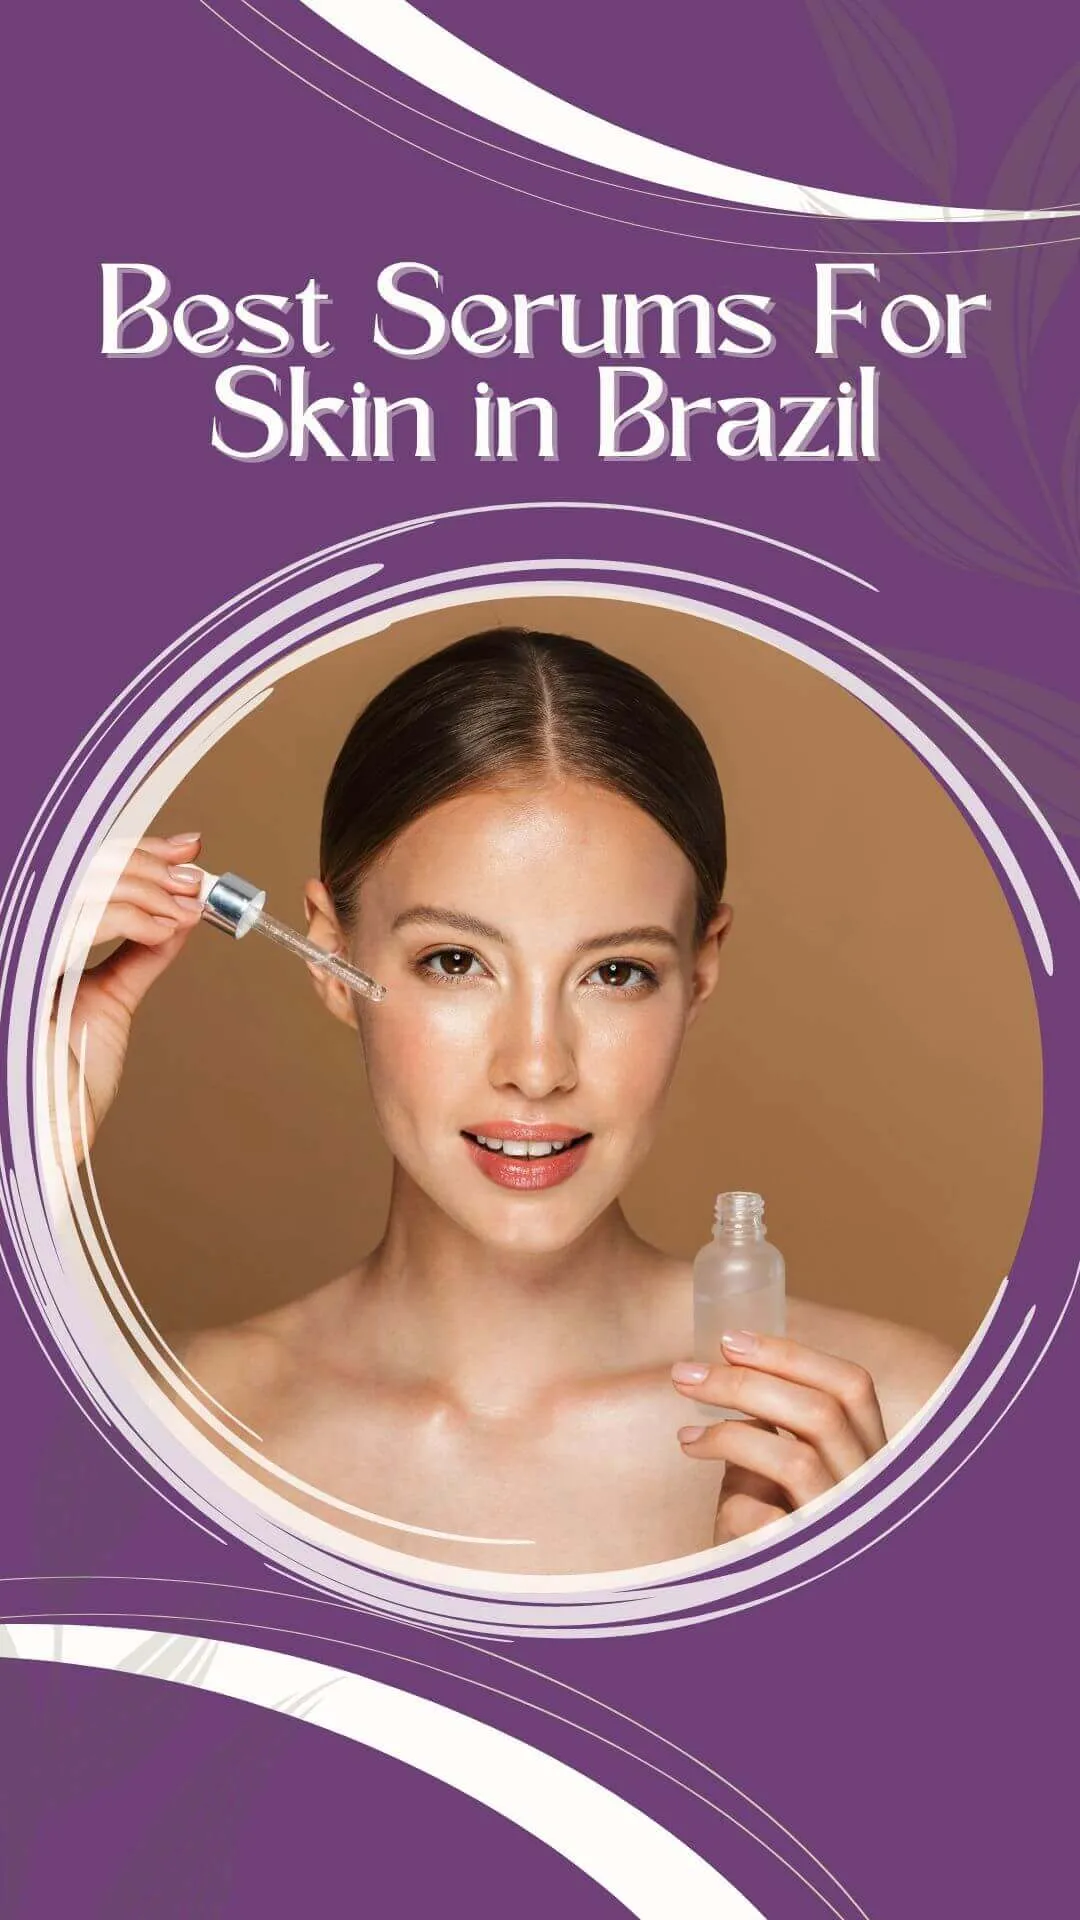 Top 12 Serums for Glowing and Radiant Skin in Brazil